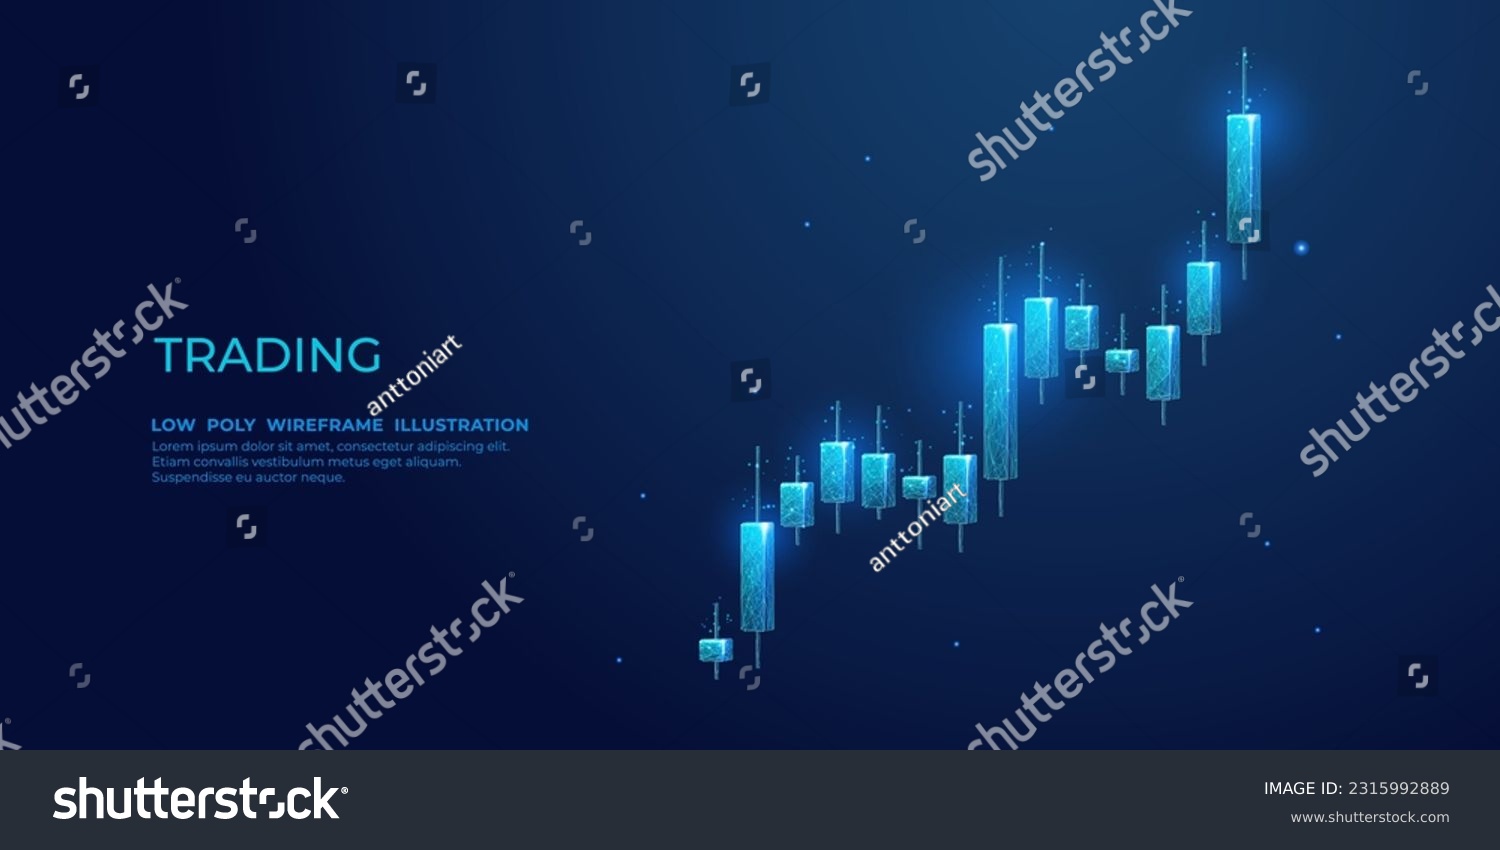 SVG of Digital 3D stock market candlestick isolated on technological dark blue background. Low poly abstract graph chart. Monochrome wireframe vector illustration with connected dots, lines, and polygons. svg